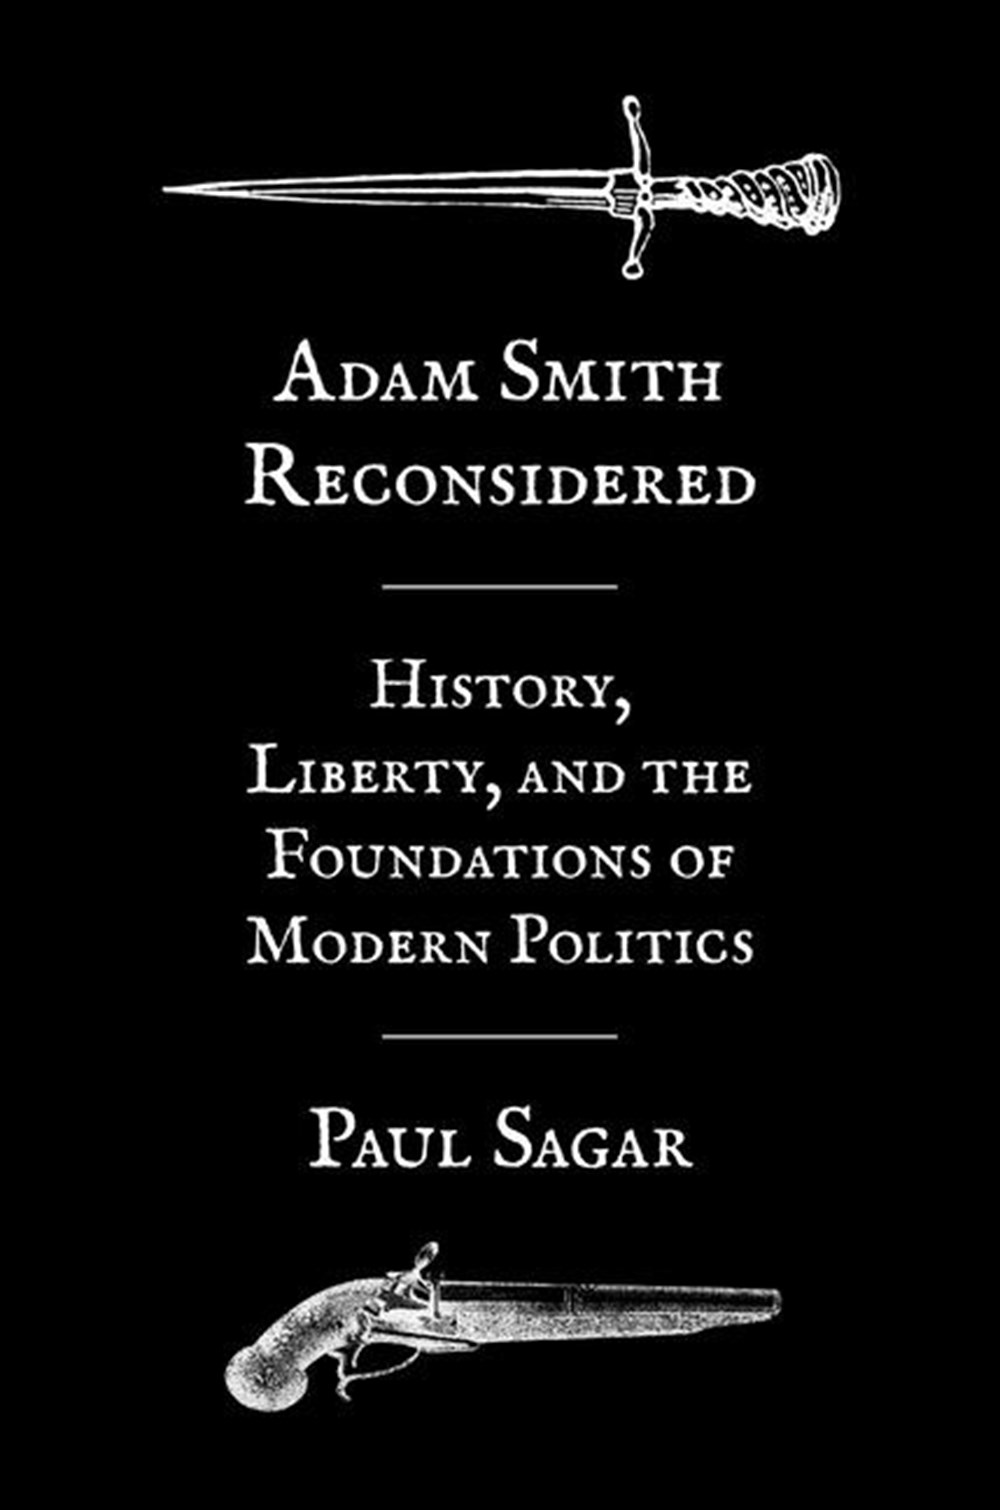 Adam Smith Reconsidered History, Liberty, and the Foundations of Modern Politics